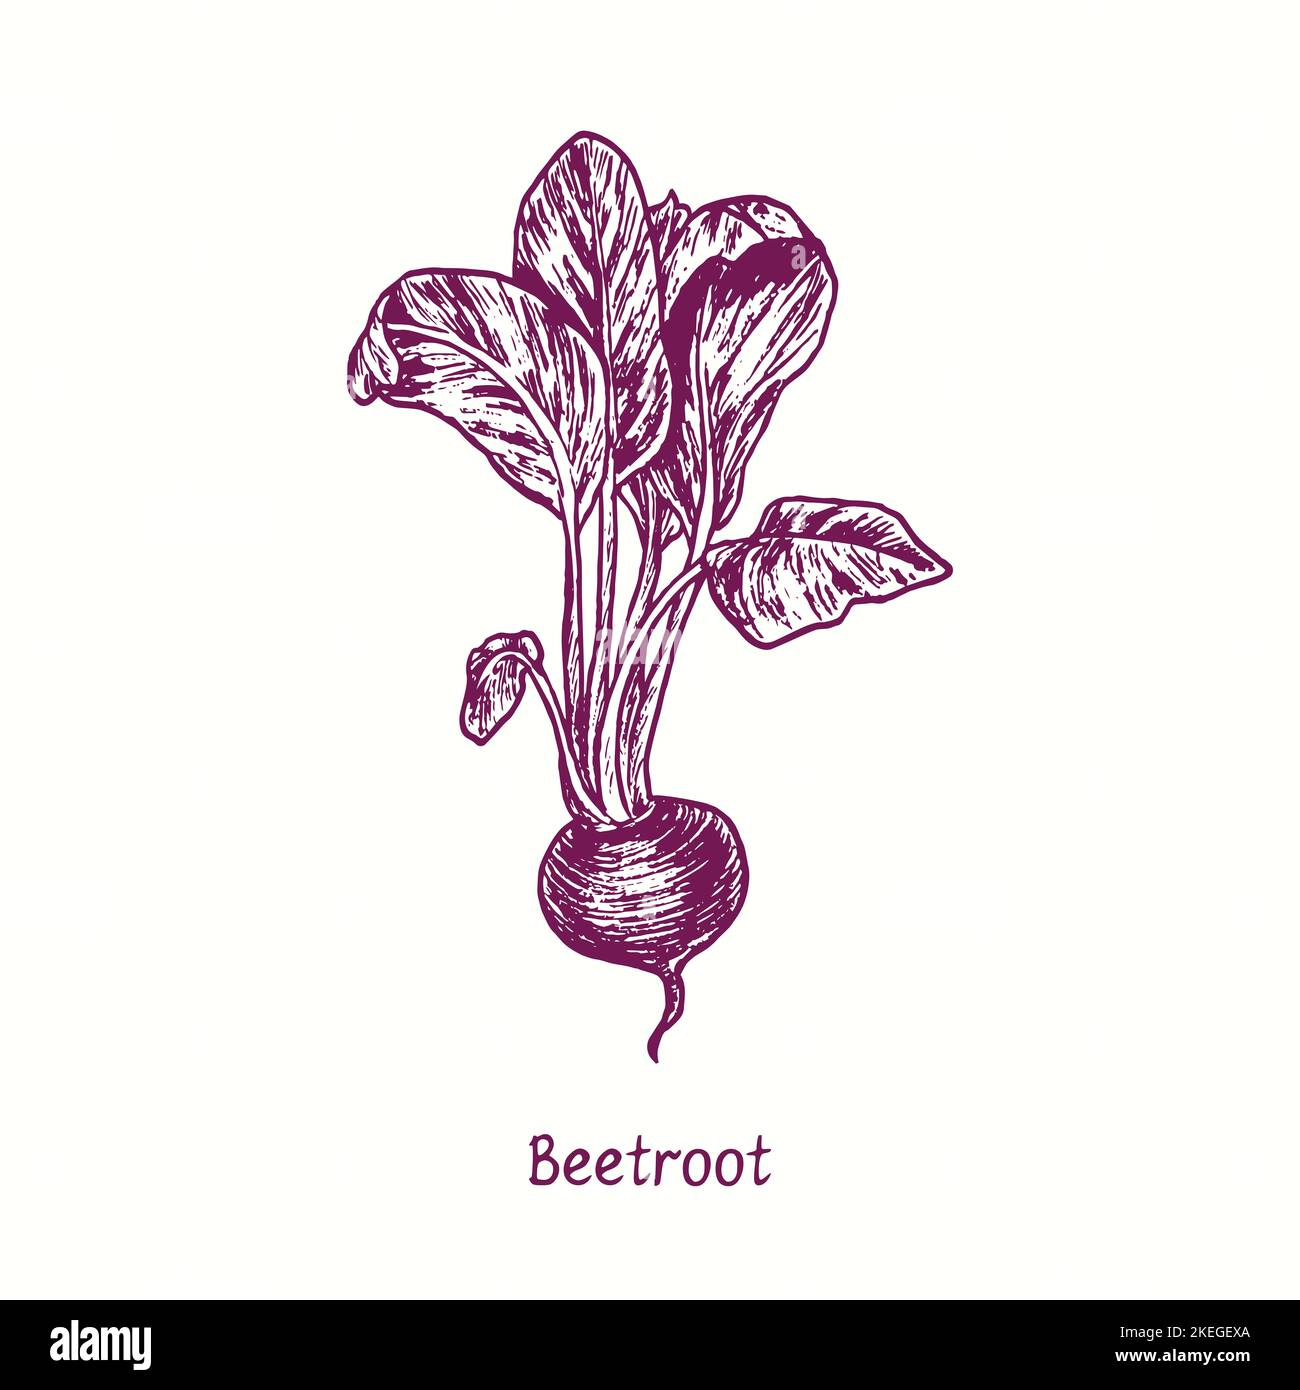 Beetroot.  Ink black and white doodle drawing in woodcut style Stock Photo